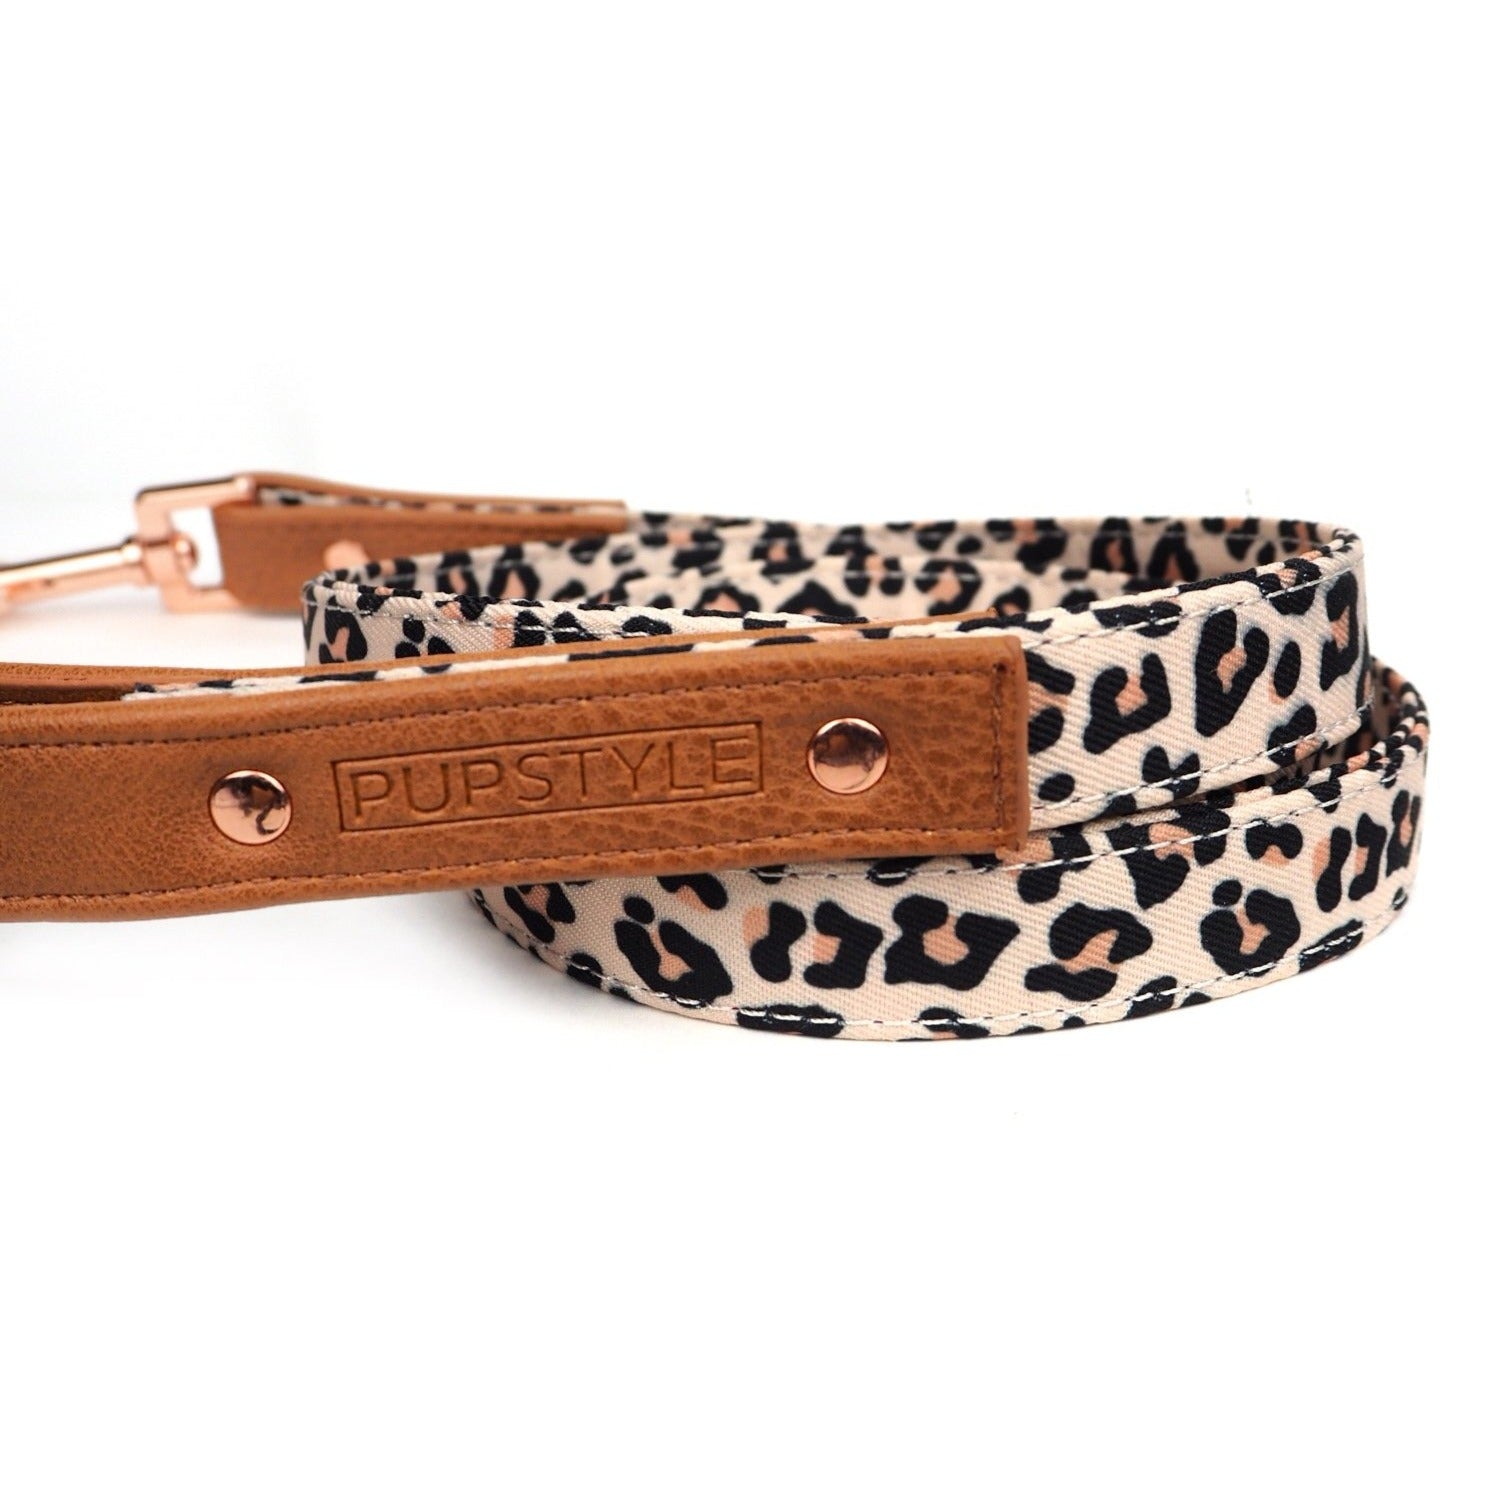 Pupstyle Dog Lead Wild One